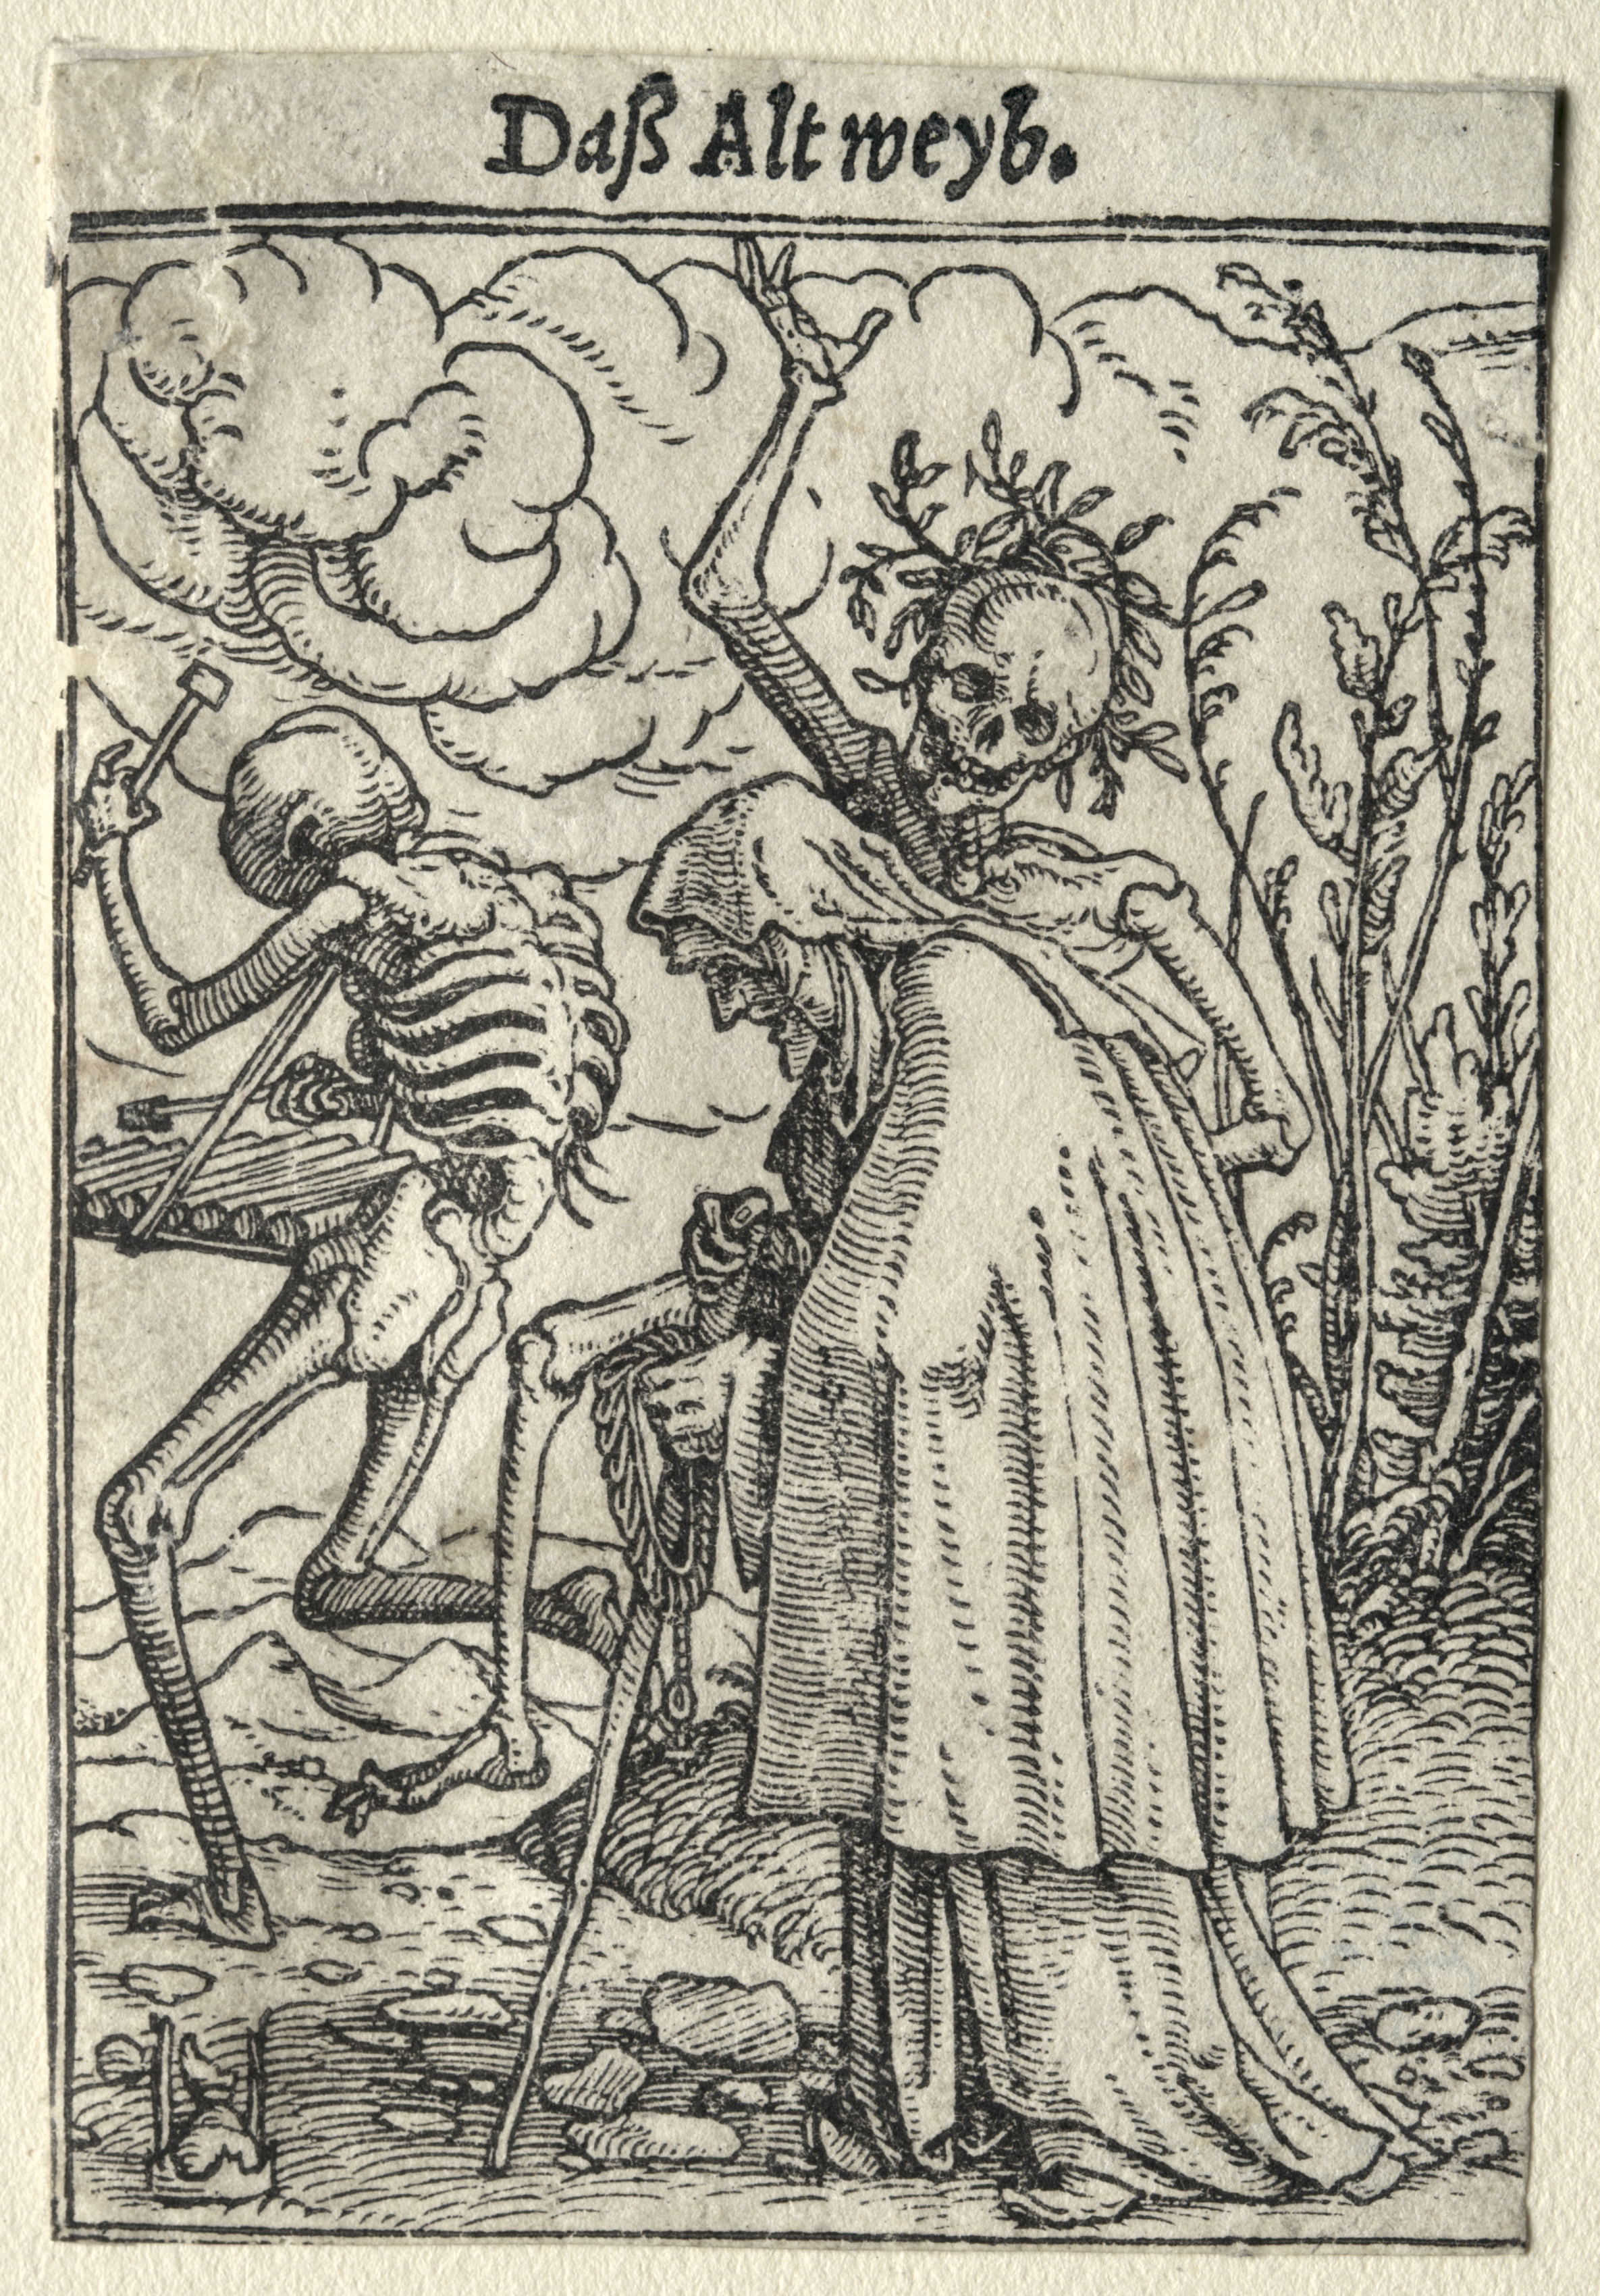 Dance of Death:  The Old Woman